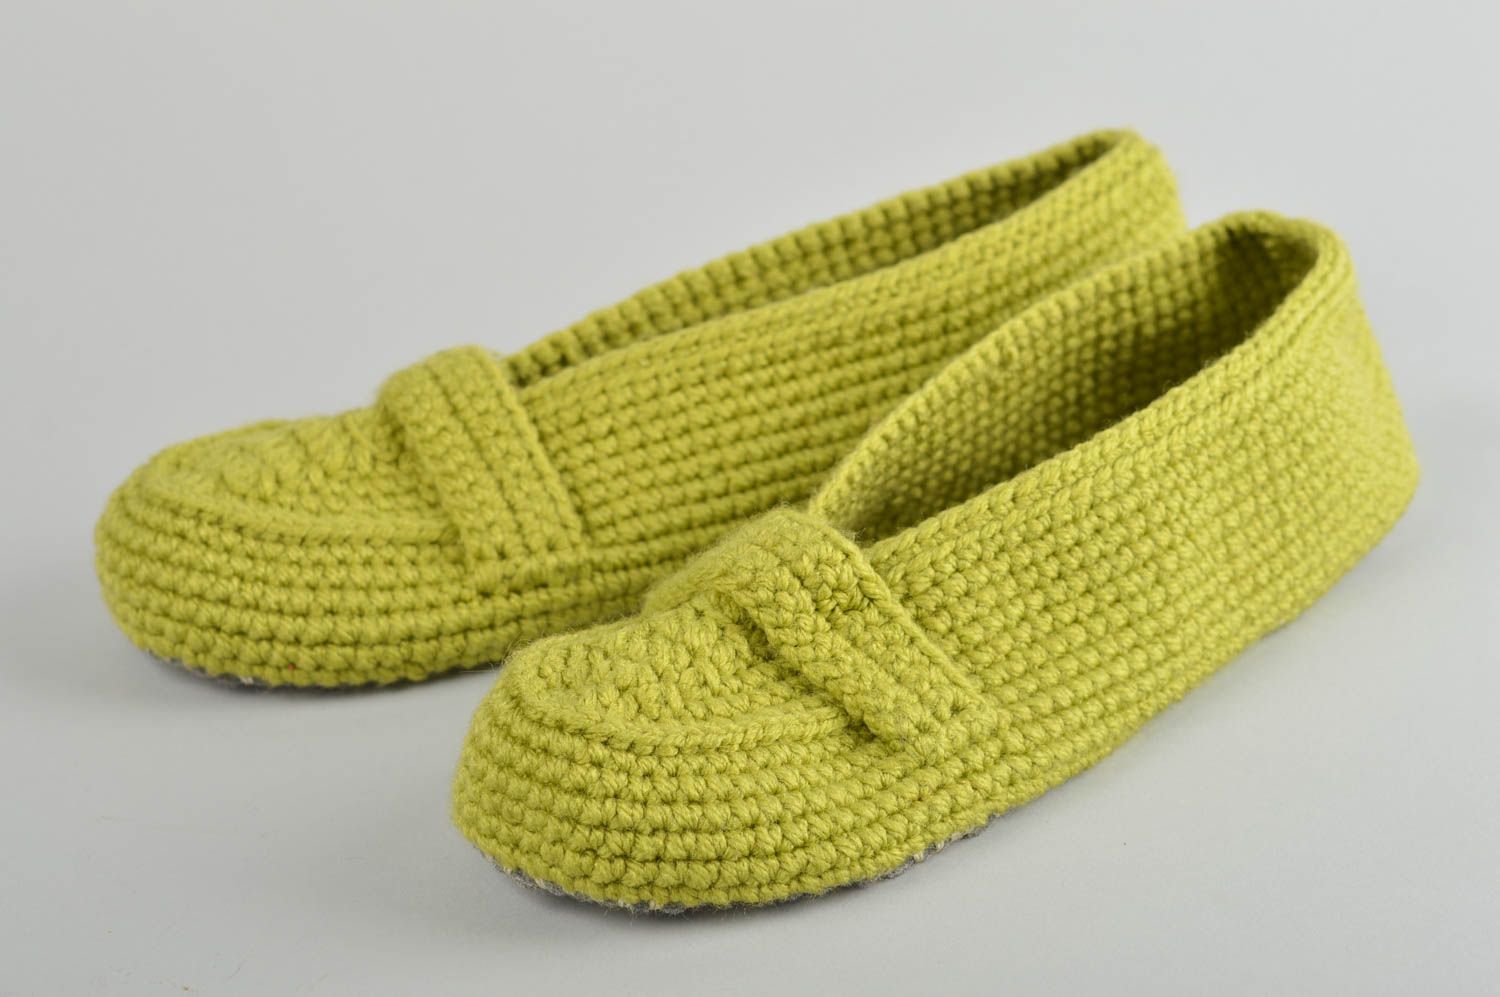 Handmade slippers women's slippers crochet shoes house shoes gifts for women photo 1